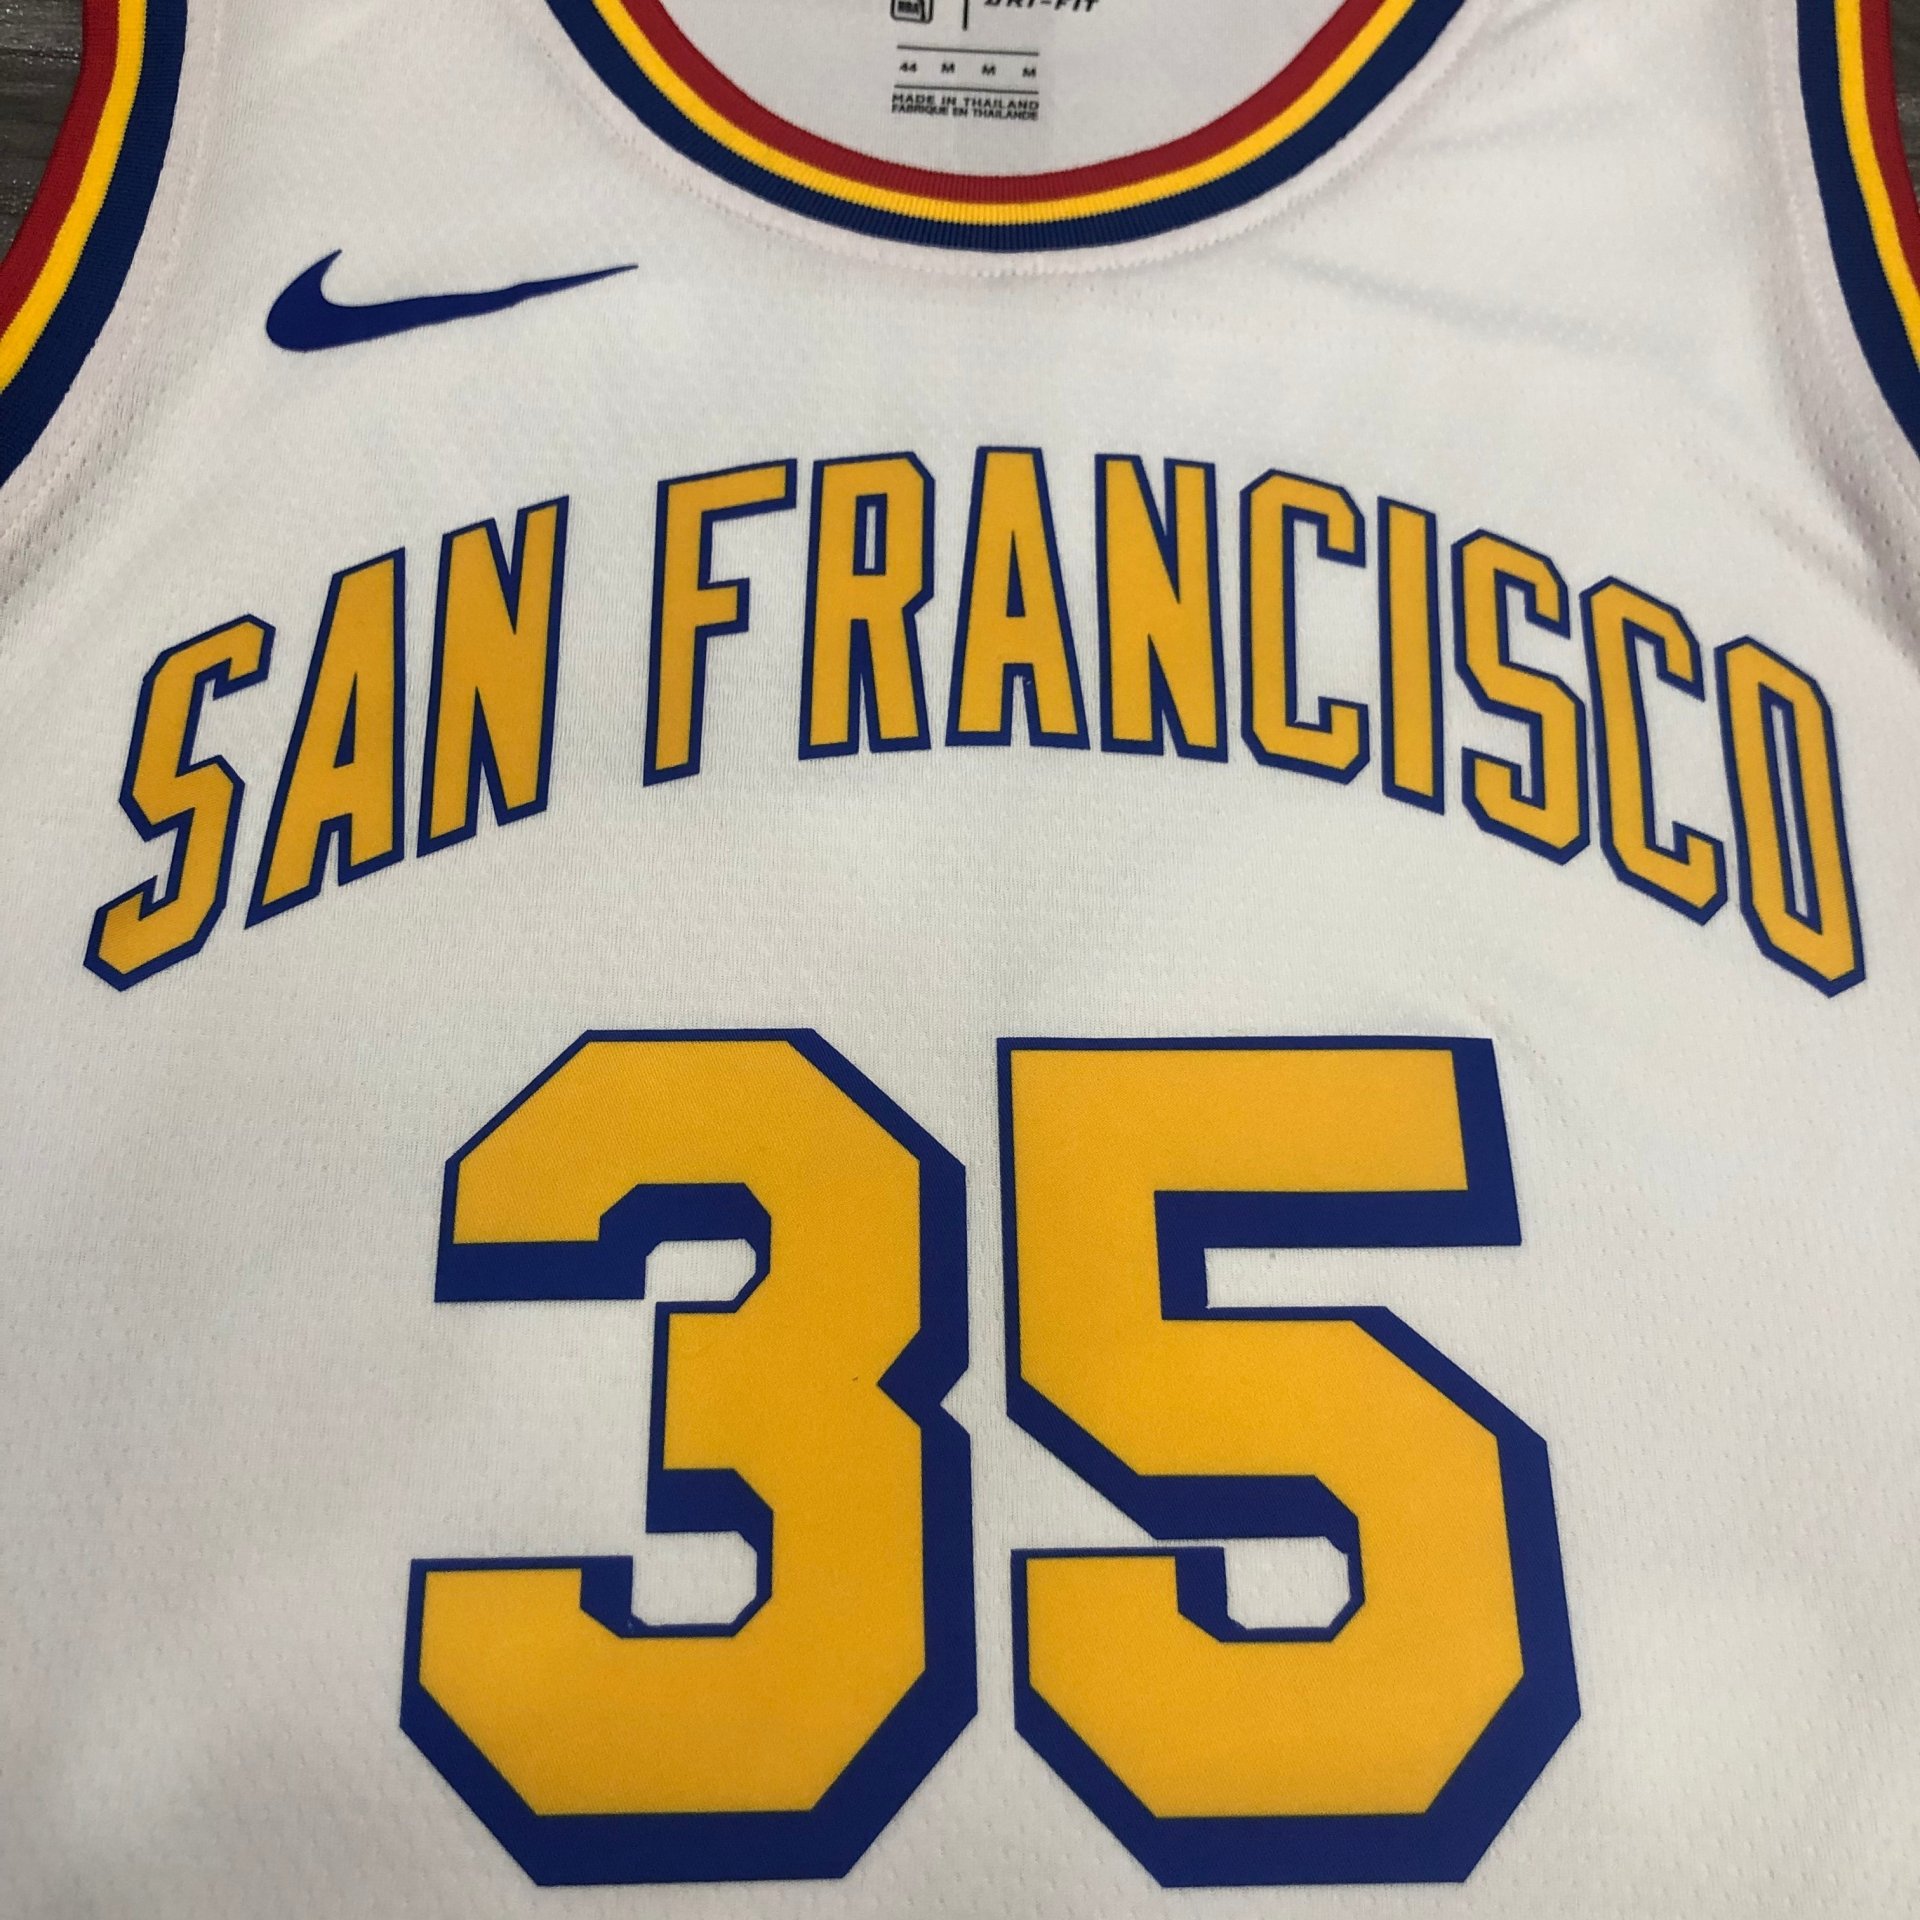 Kevin Durant Signed Golden State Warriors City Edition Jersey